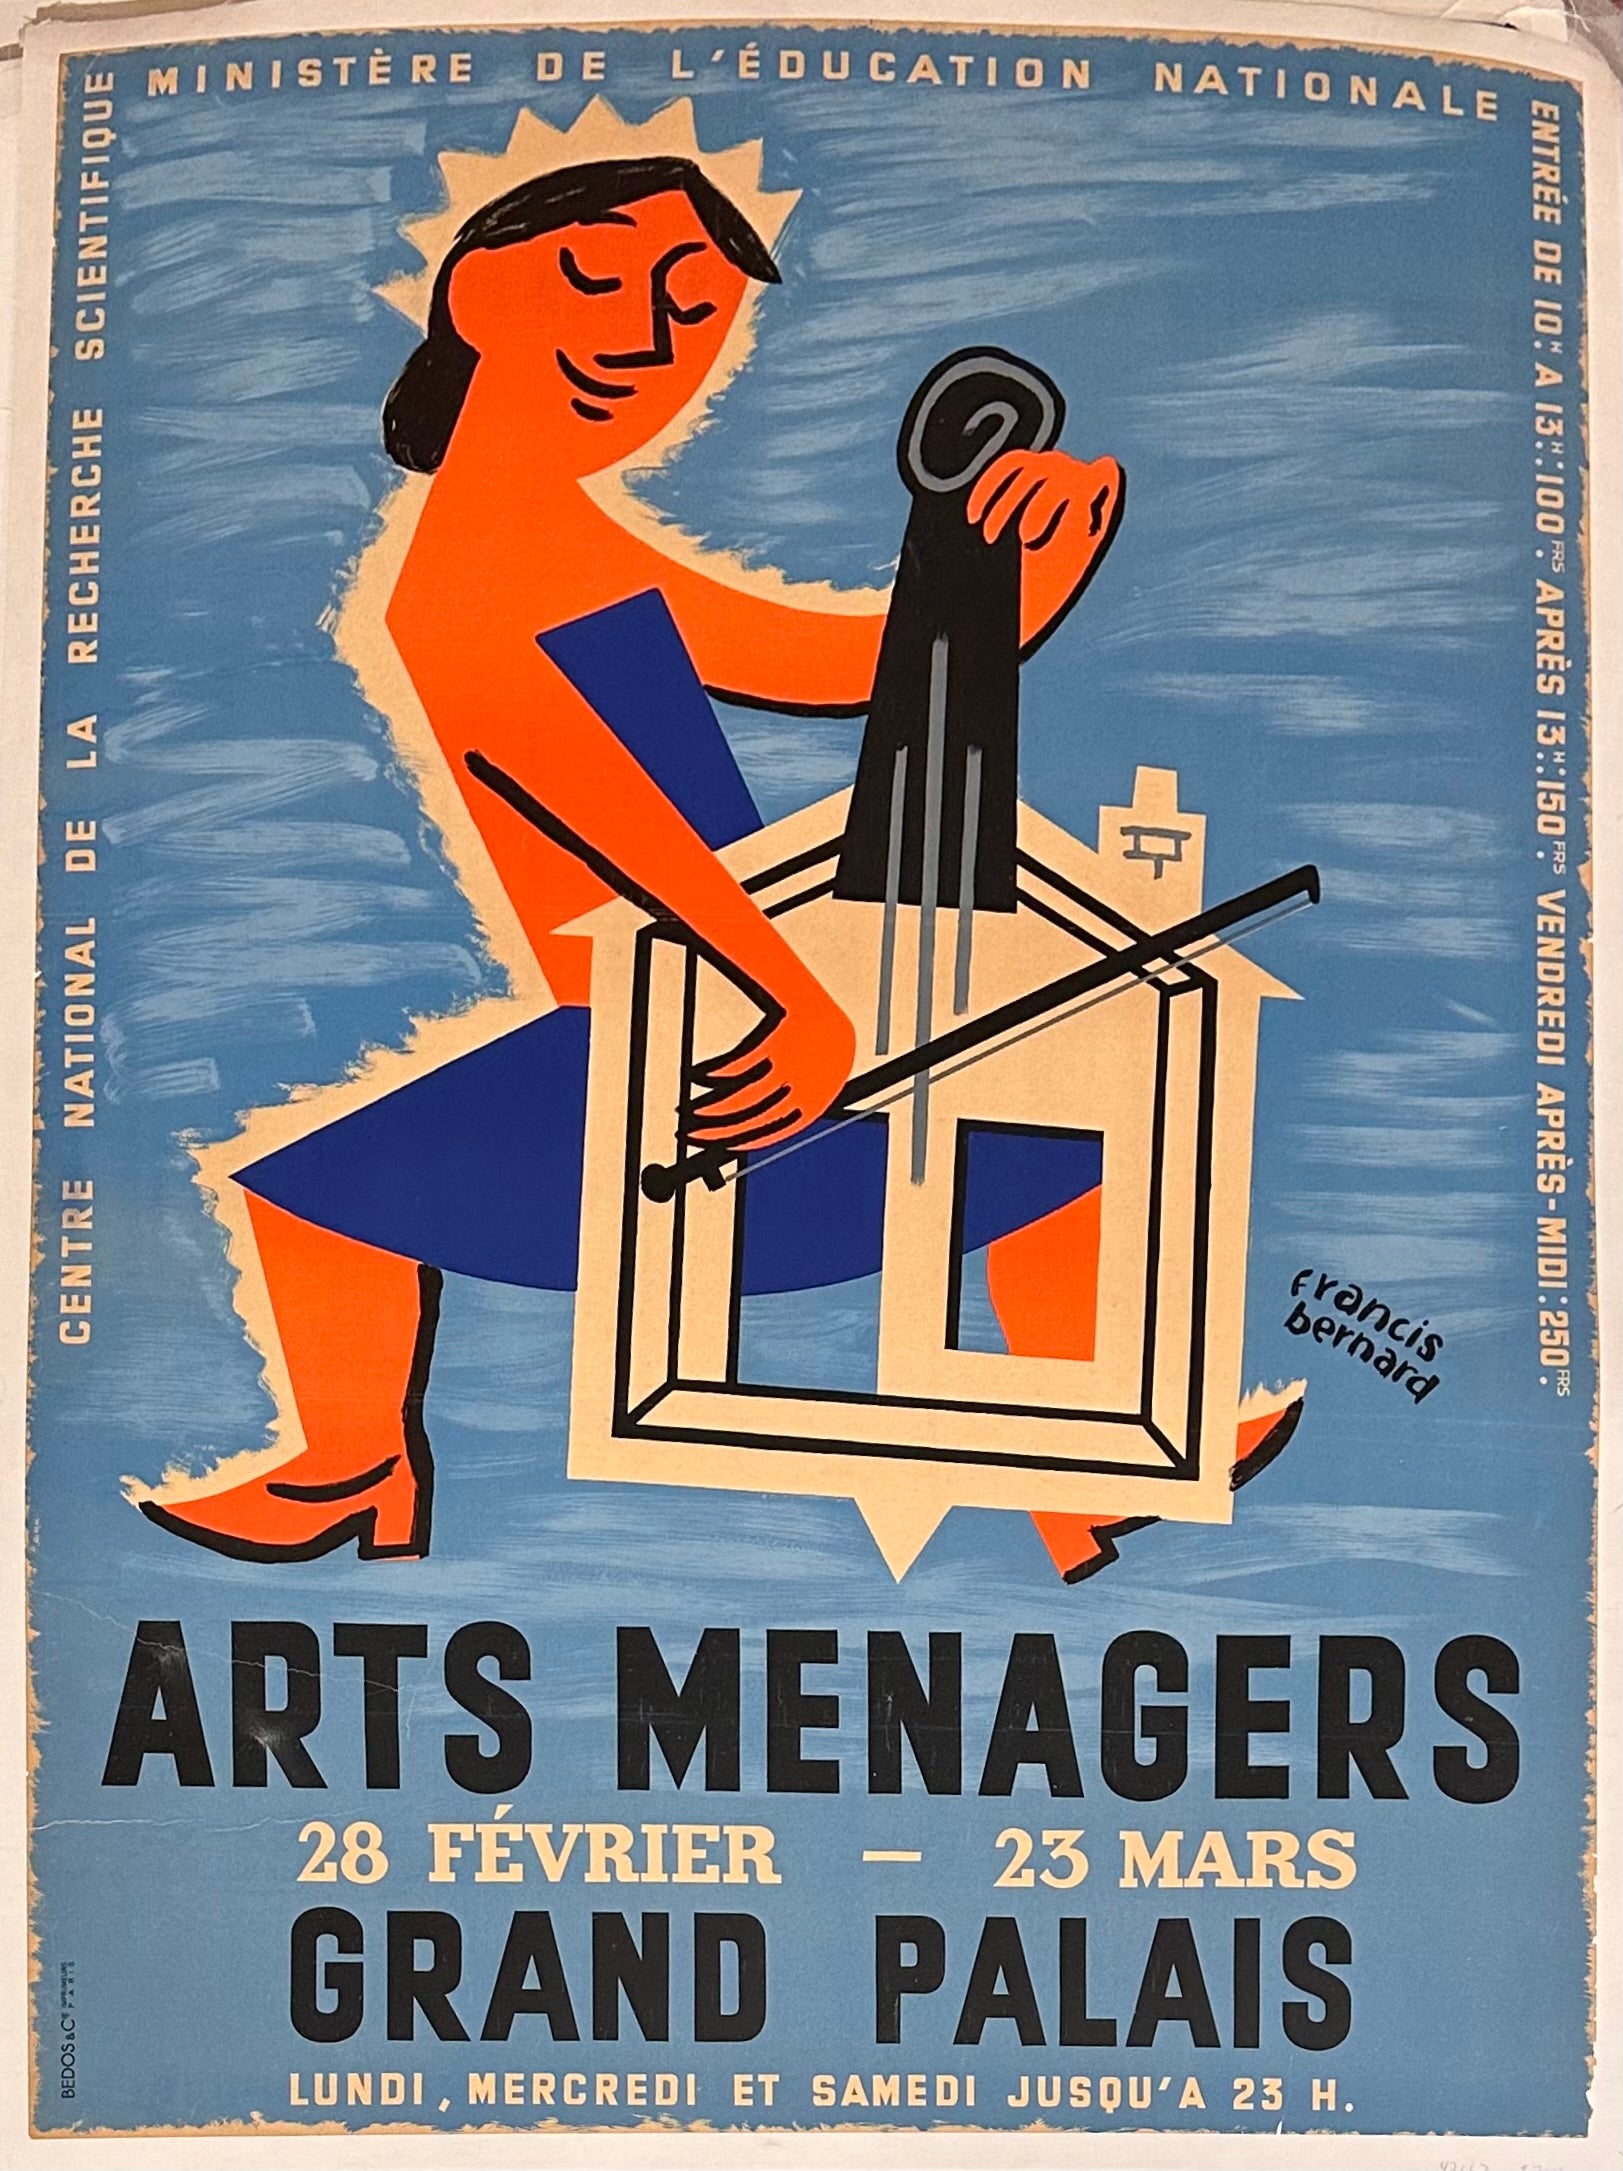 Arts Menagers - Women playing Violin poster ✓